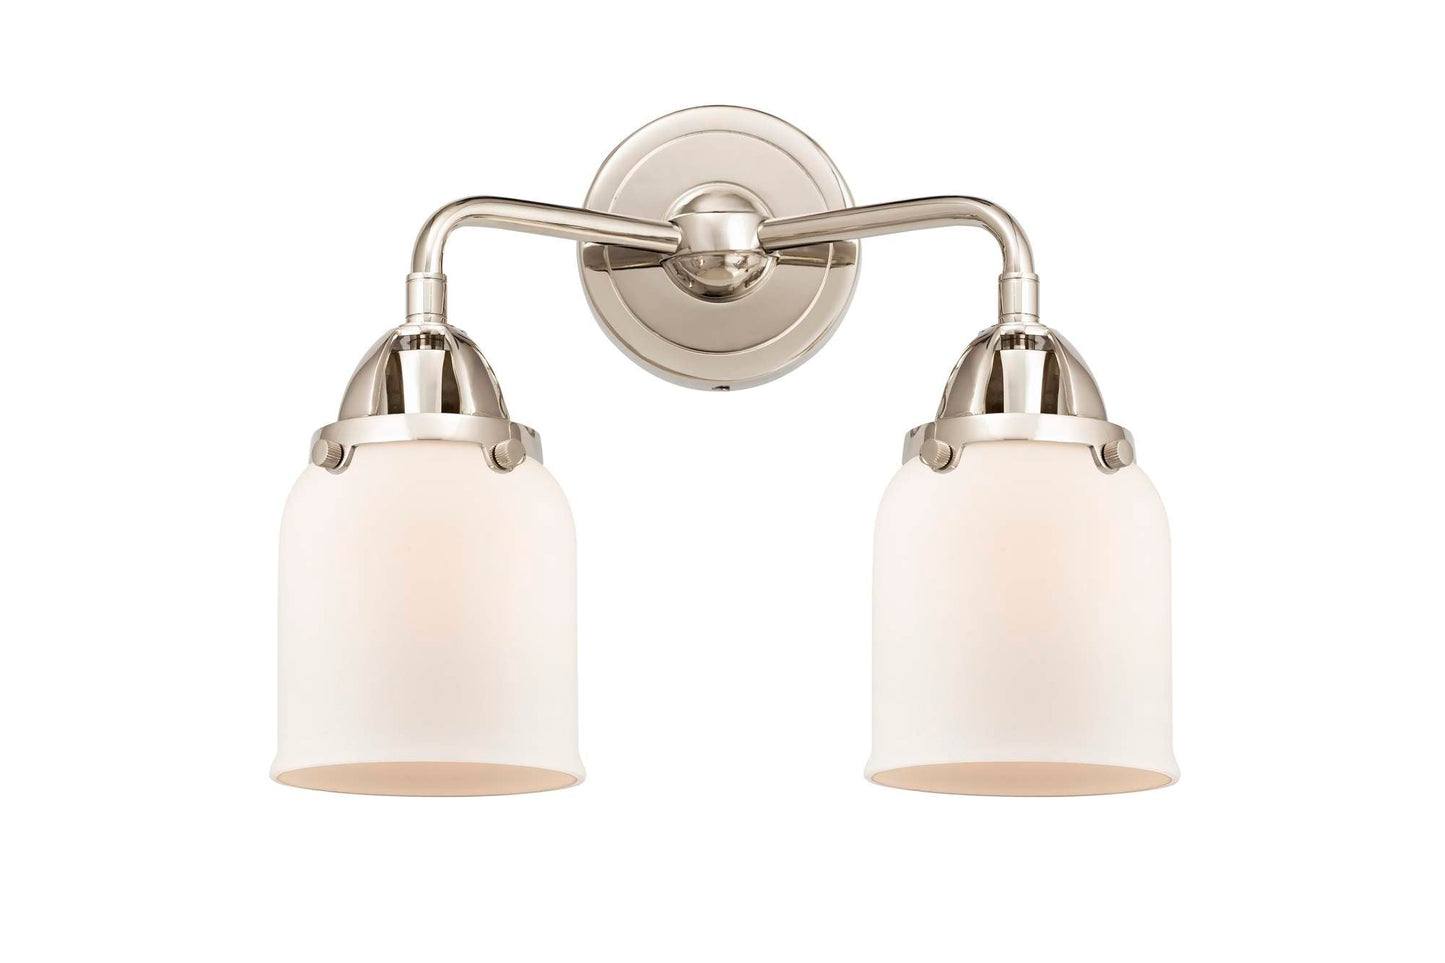 288-2W-PN-G51 2-Light 13" Polished Nickel Bath Vanity Light - Matte White Cased Small Bell Glass - LED Bulb - Dimmensions: 13 x 6.75 x 12.125 - Glass Up or Down: Yes